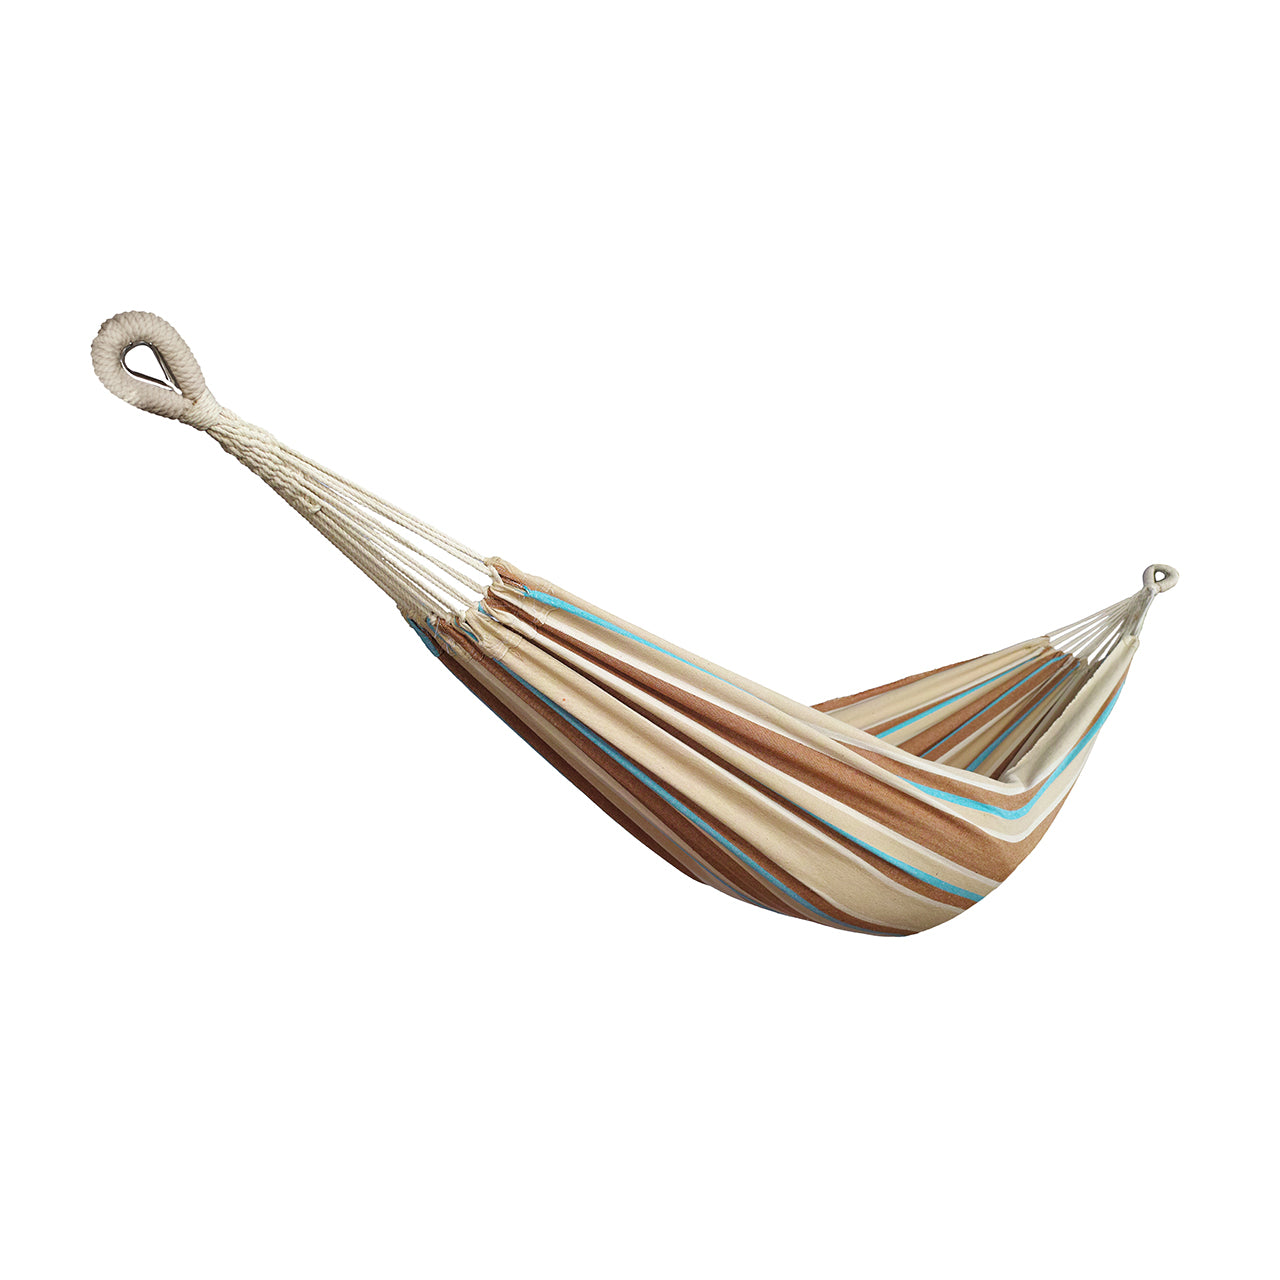 Bliss Hammocks 40-inch Wide Hammock in a Bag with Hand-woven Rope loops in the Hampton stripe variation.